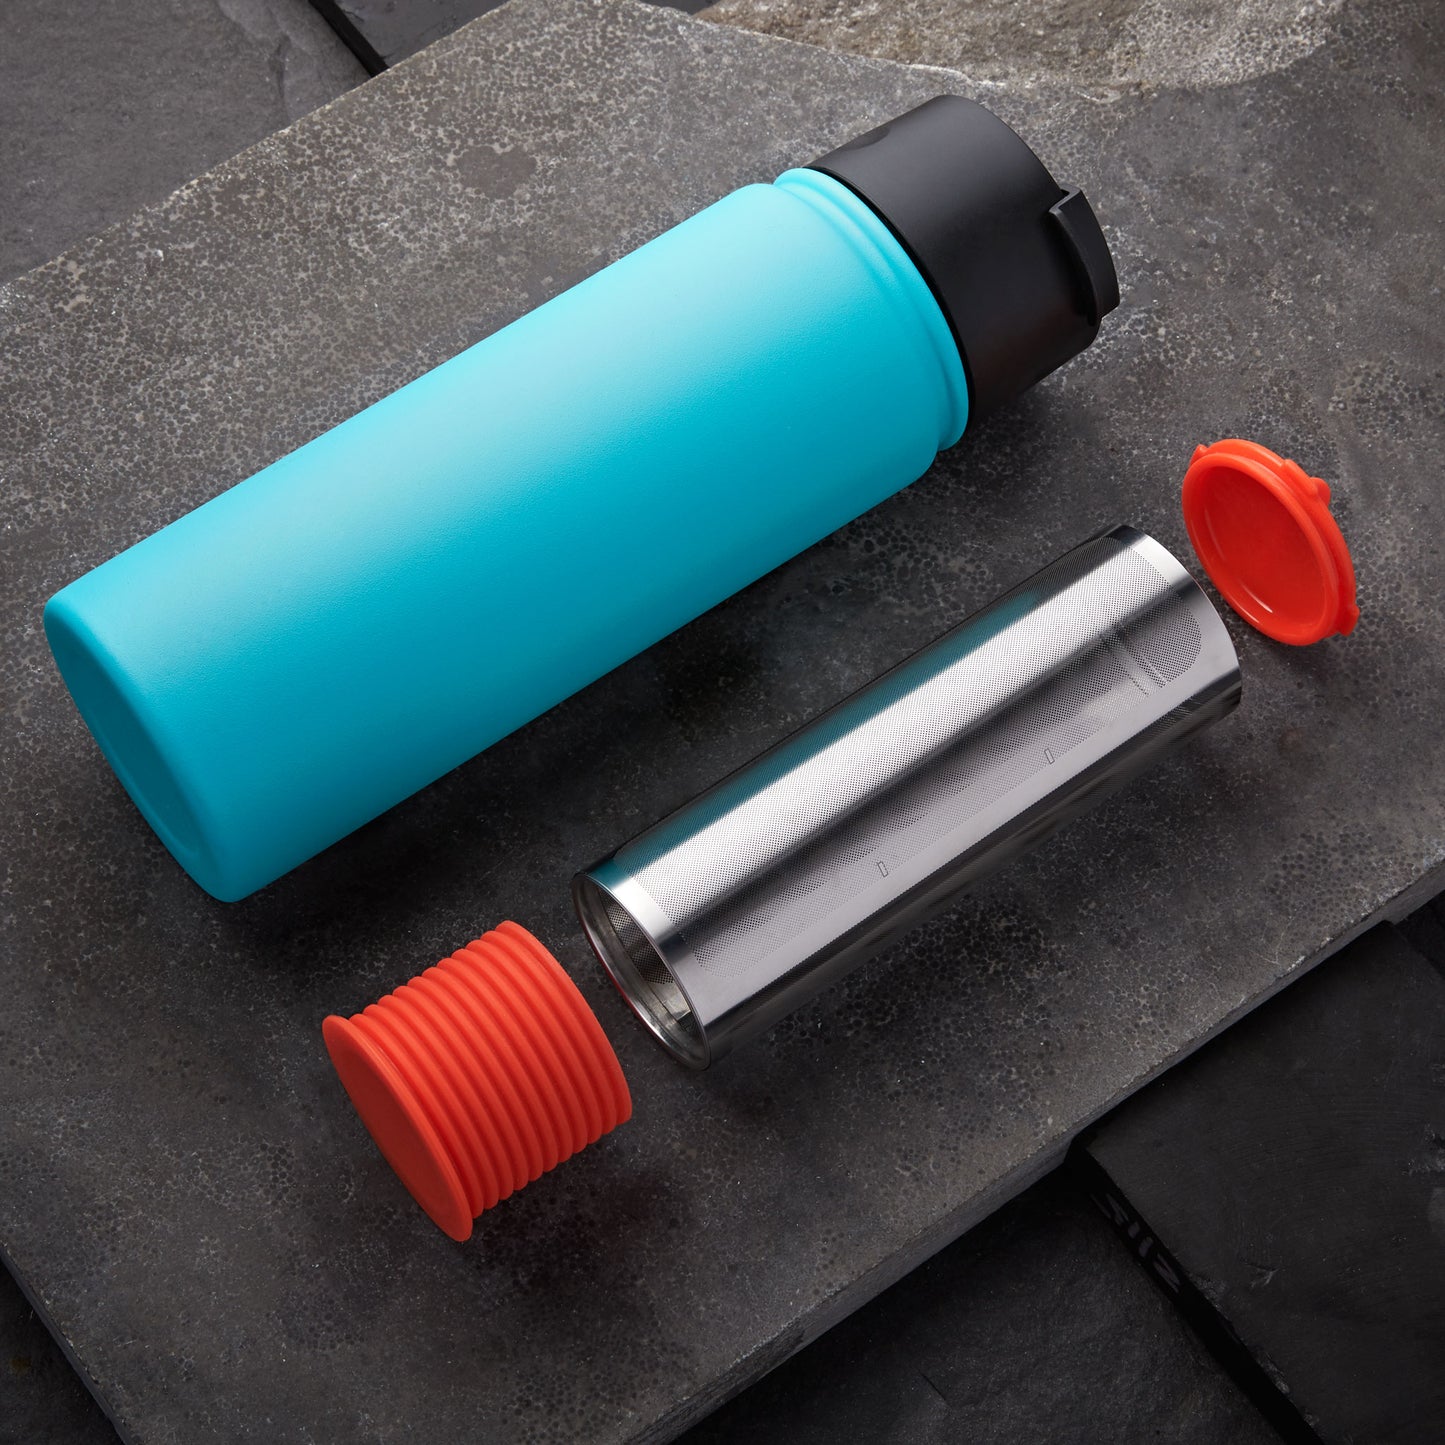 Rumble Go cold brew coffee filter with orangey-red cap and base next to one of many compatible water bottles